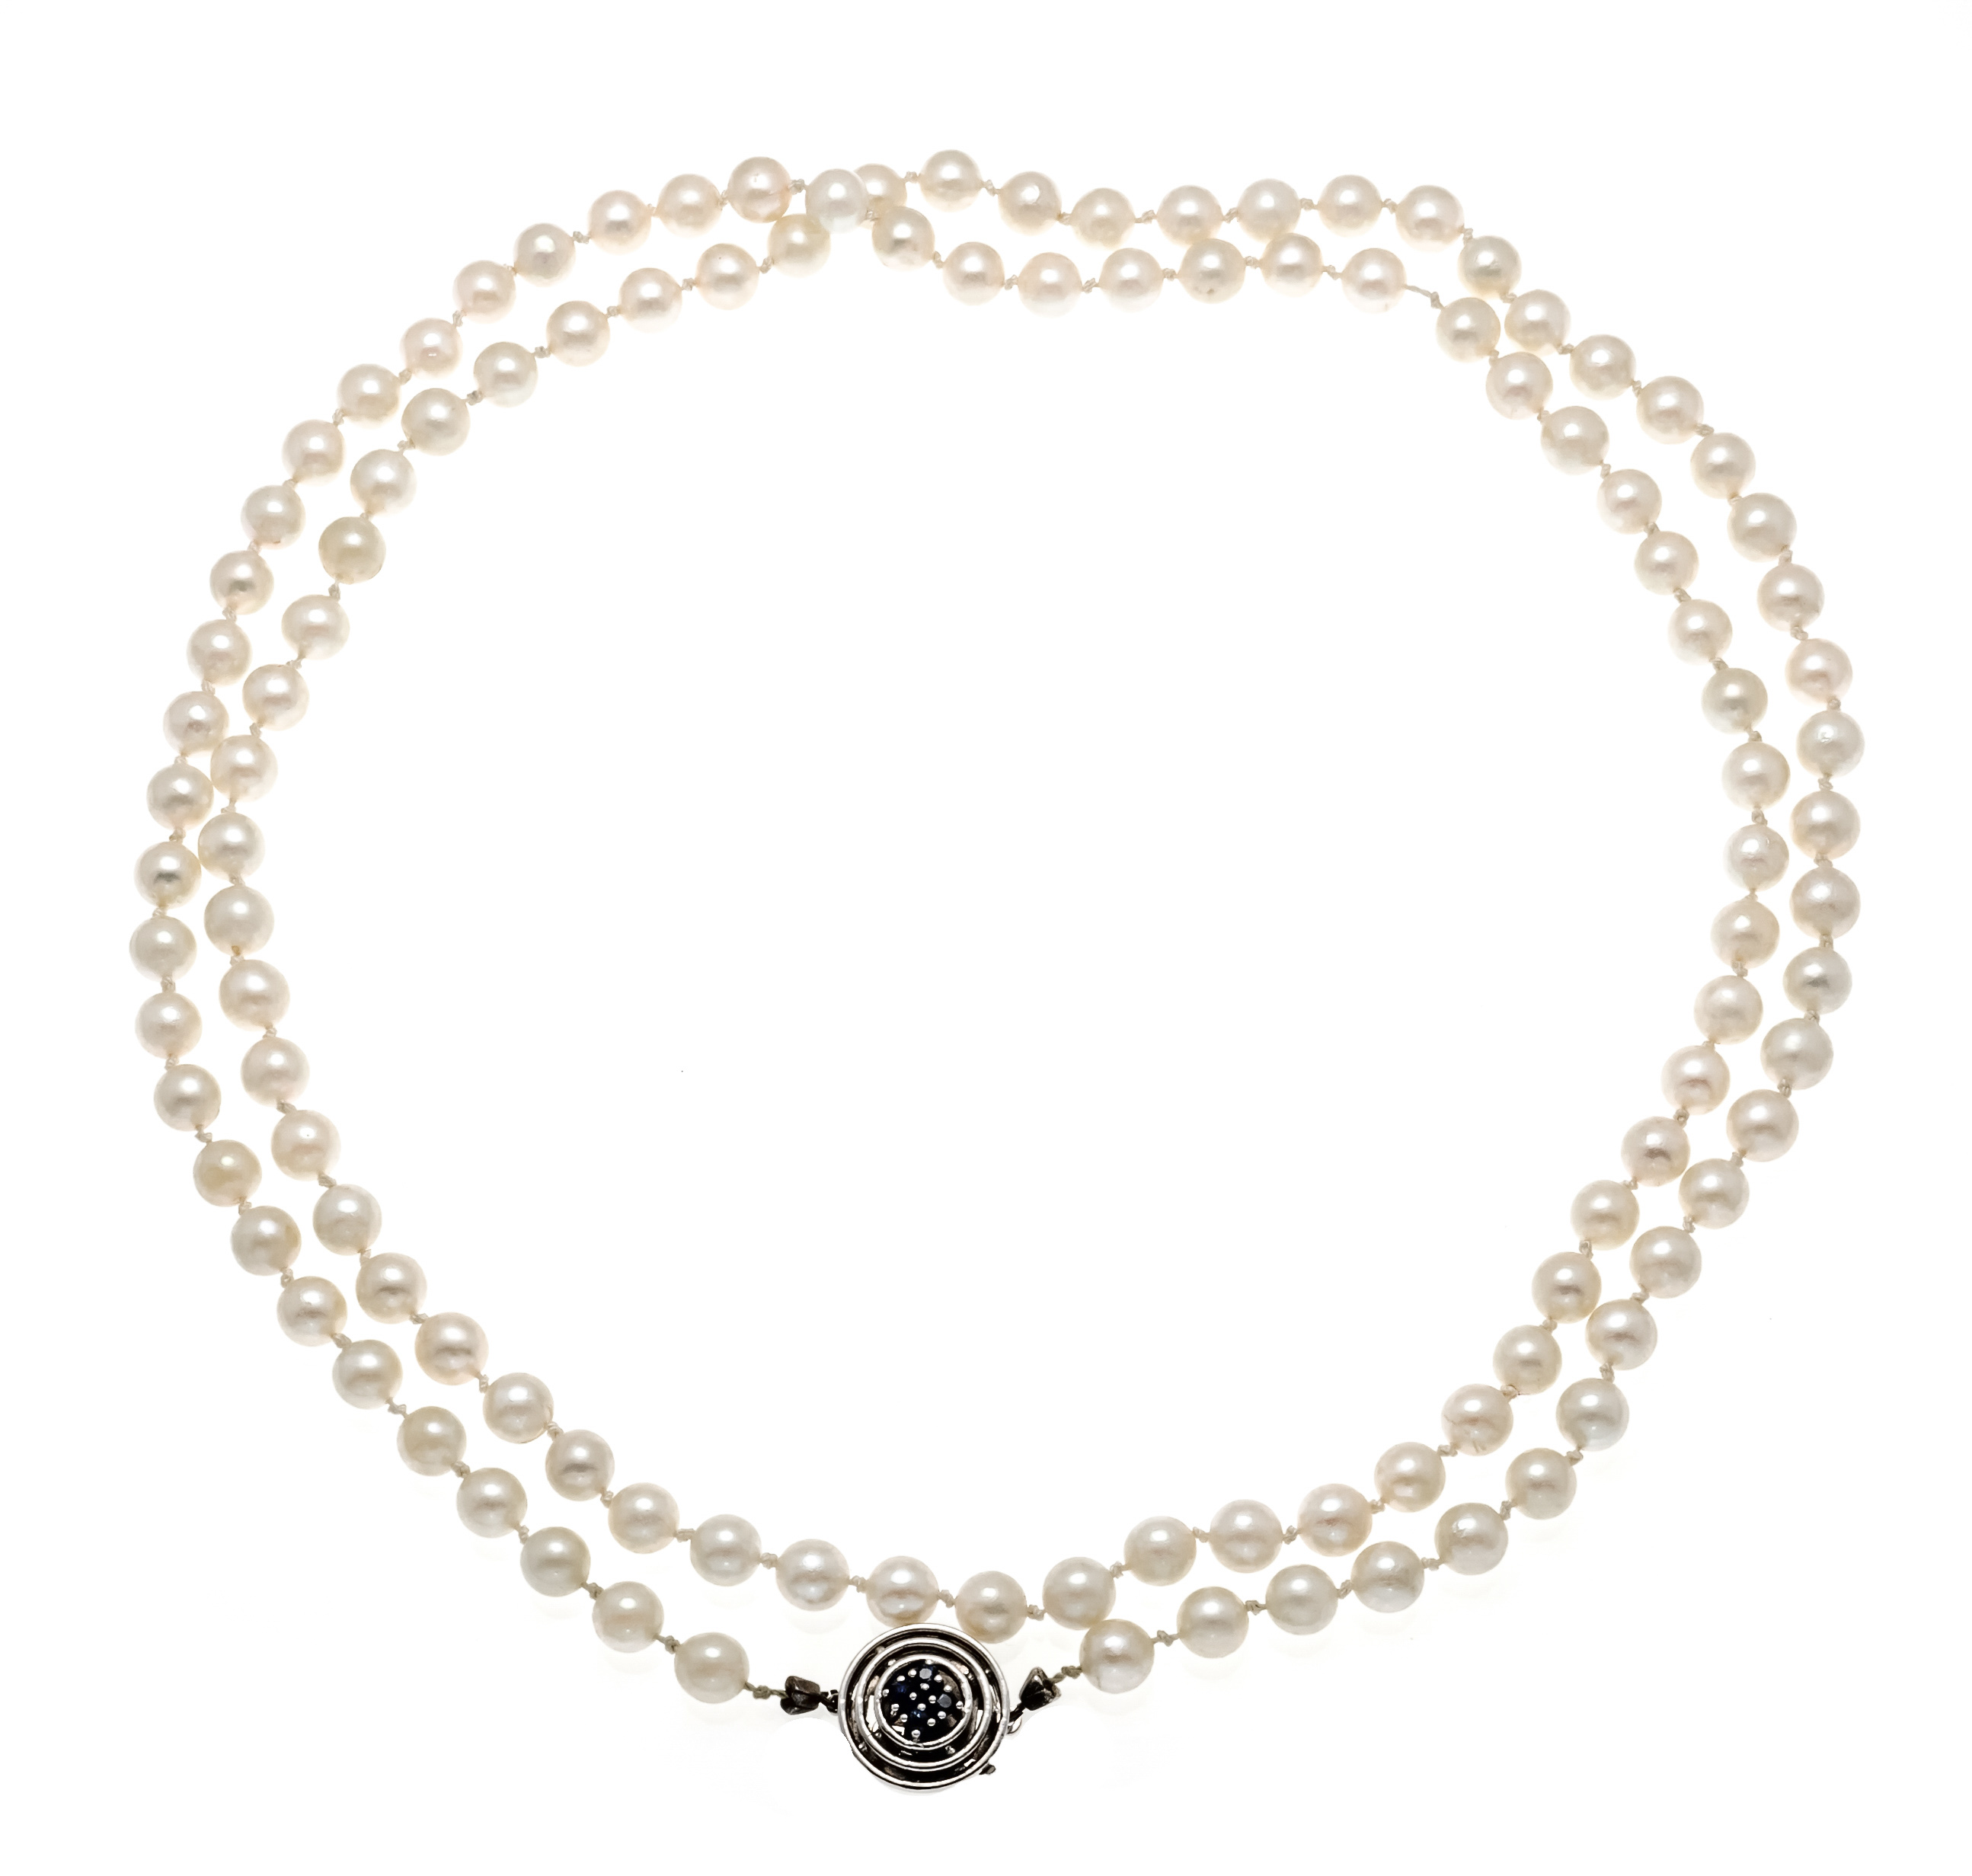 Akoya pearl necklace WG 585/000 with 4 round faceted sapphires 2.5 mm dark blue, opaque, strand of